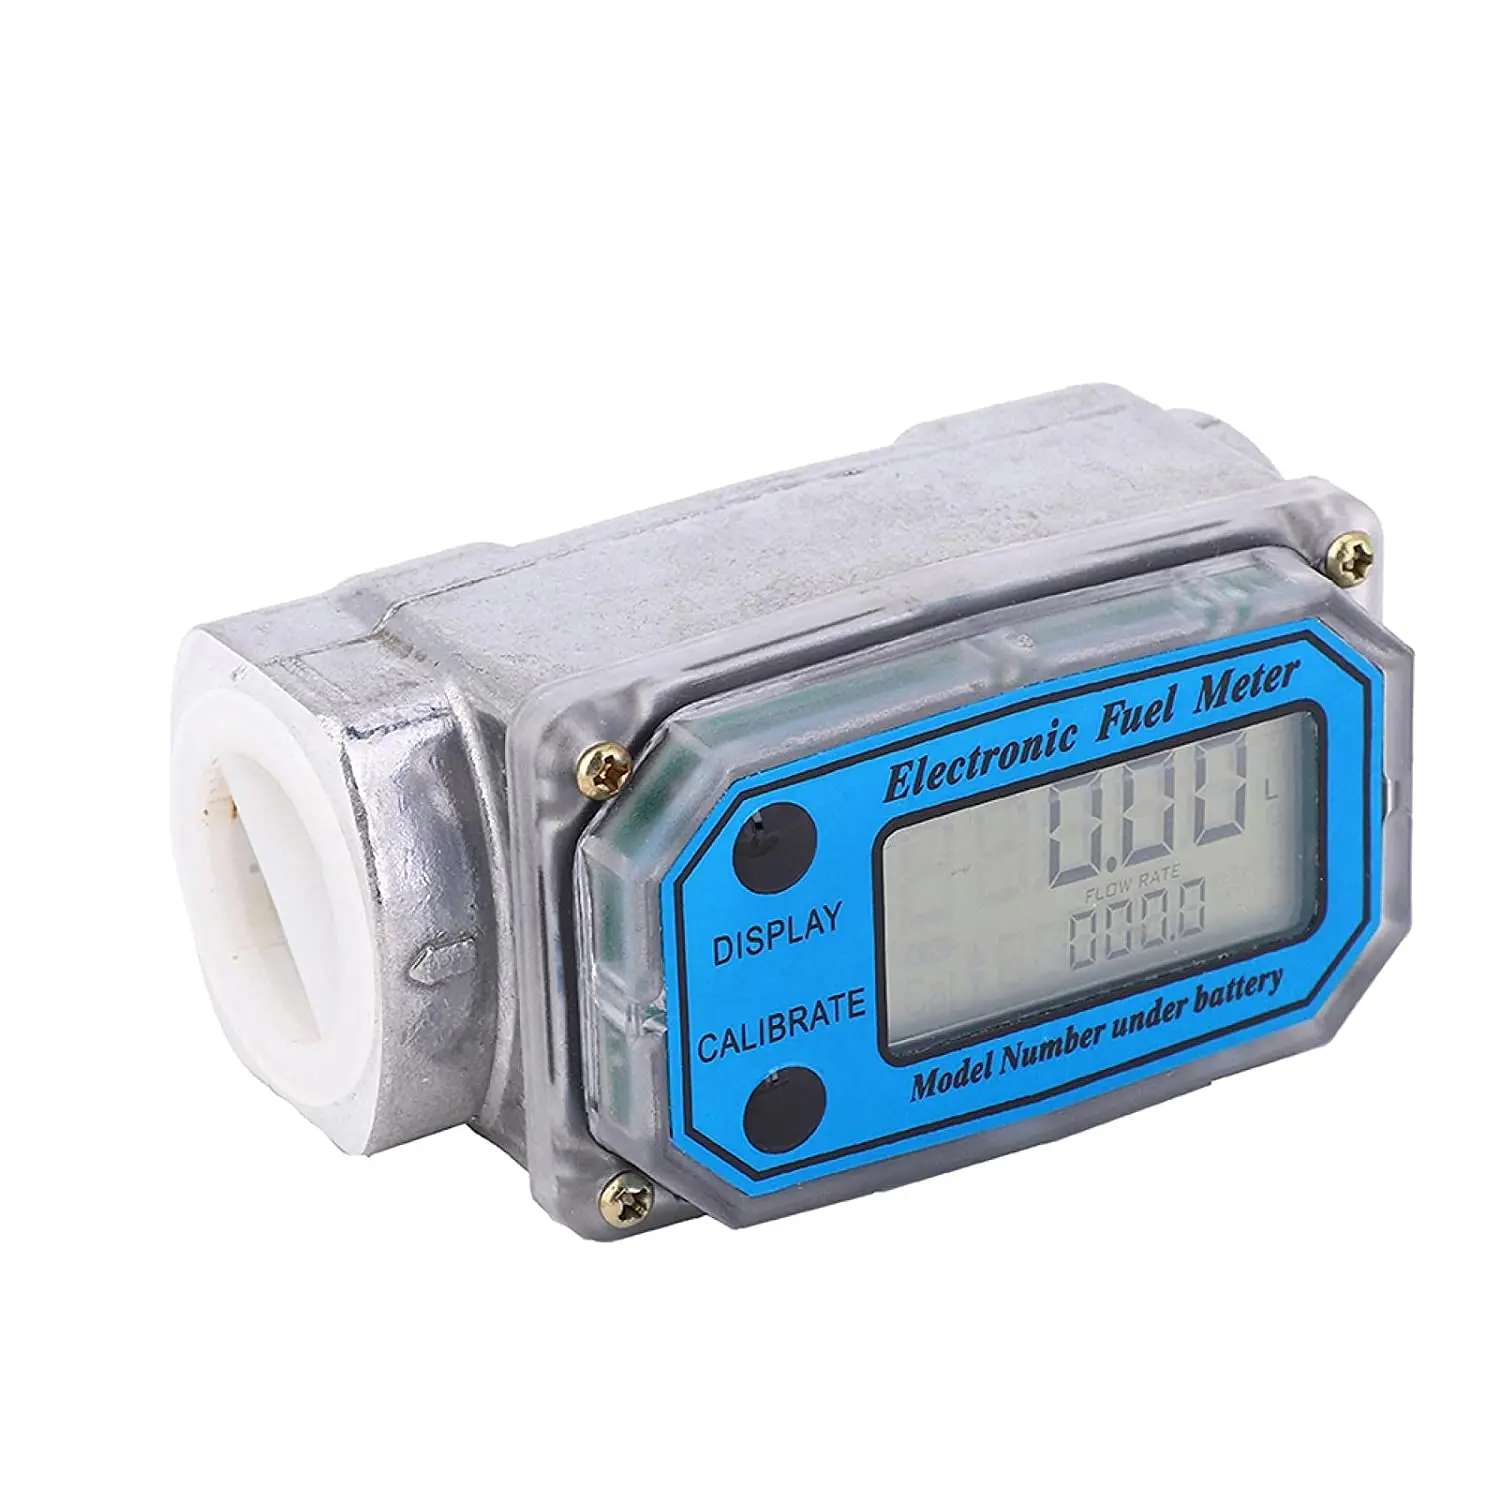 1″ Digital Turbine Flow Meter,Gas Oil Fuel Flowmeter,Pump Flow Meter Diesel Fuel Diesel Kerosene Line Pipe Counter for Chemicals Water etc Red 